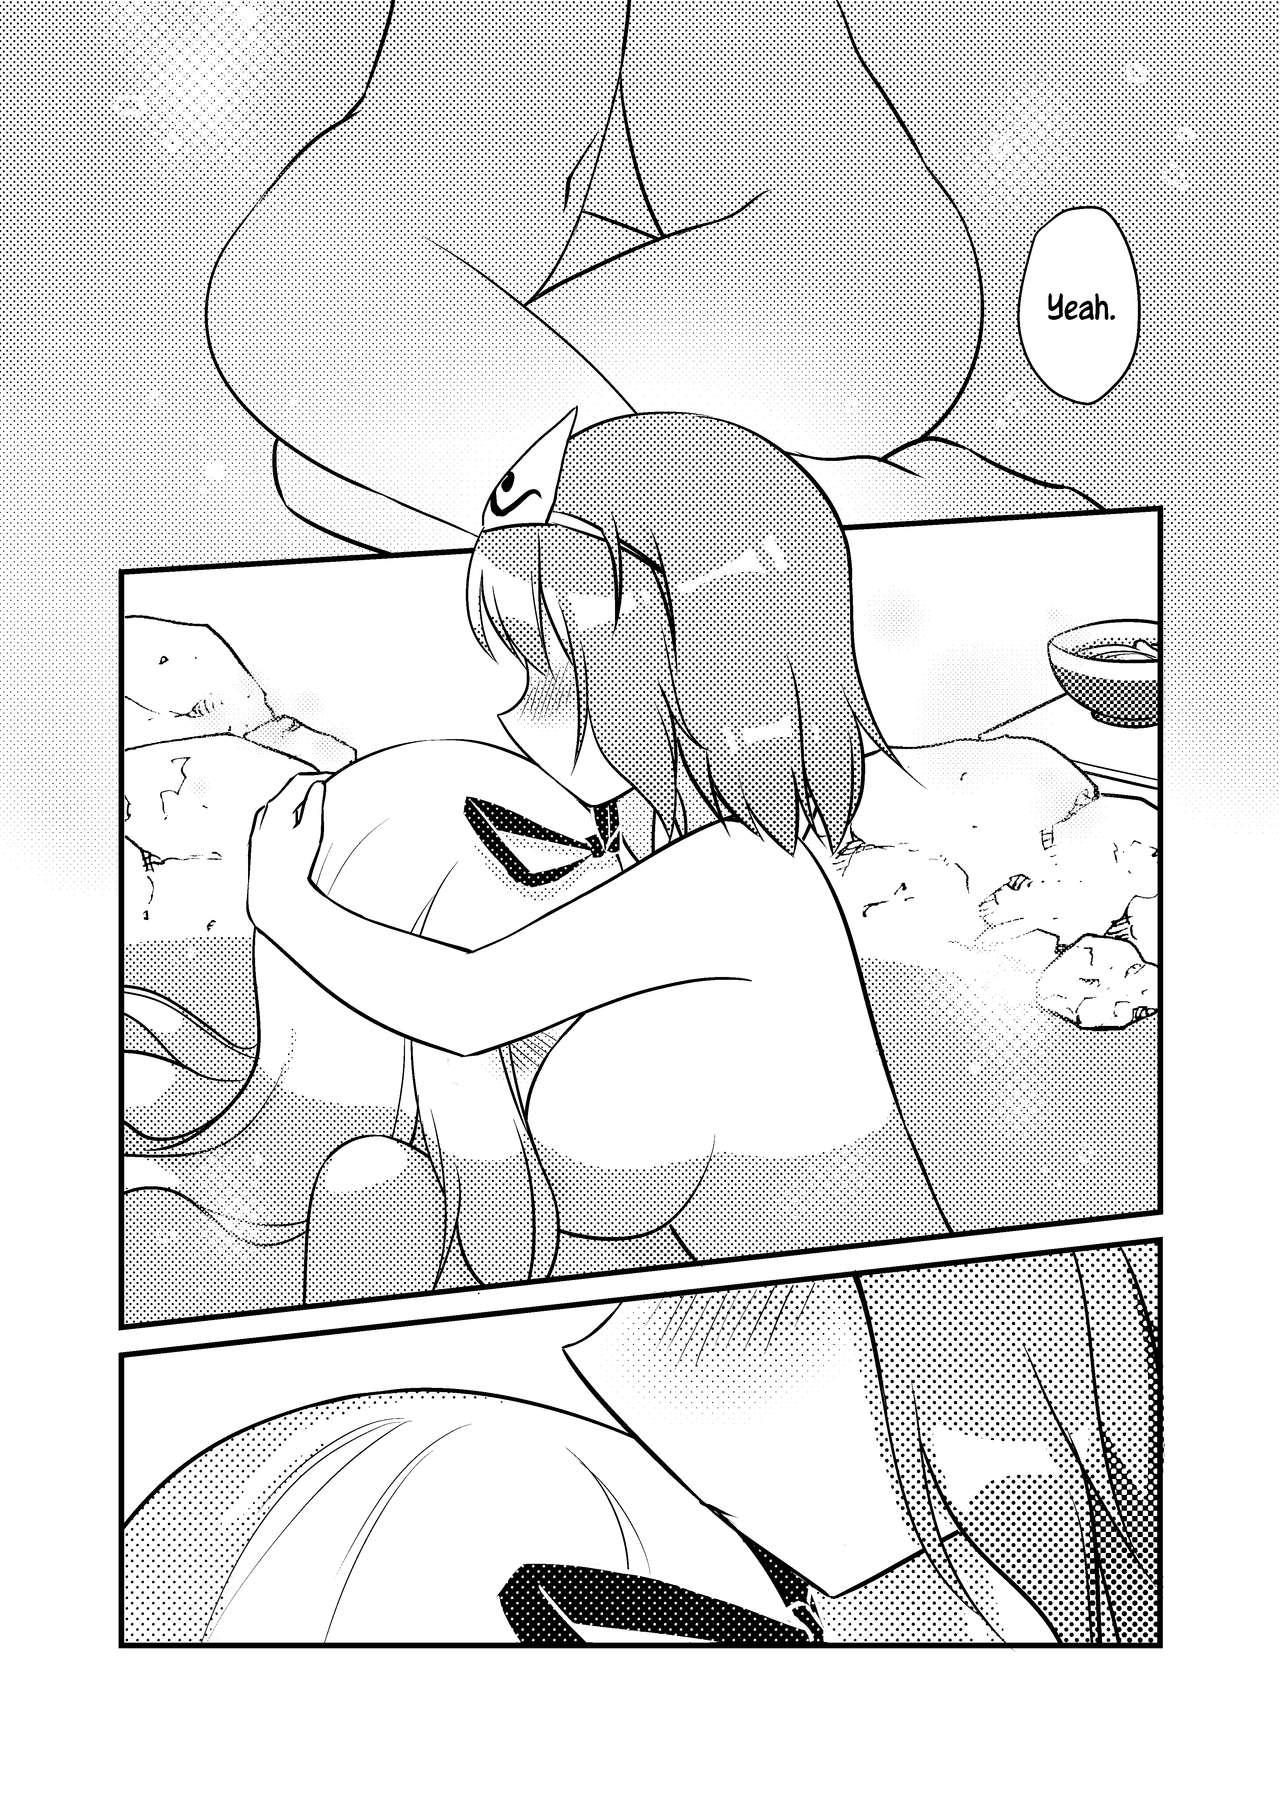 Sharing ????一起泡温泉吧！ | ????Let's Soak in the Hot Spring! - Touhou project Gay Kissing - Page 10